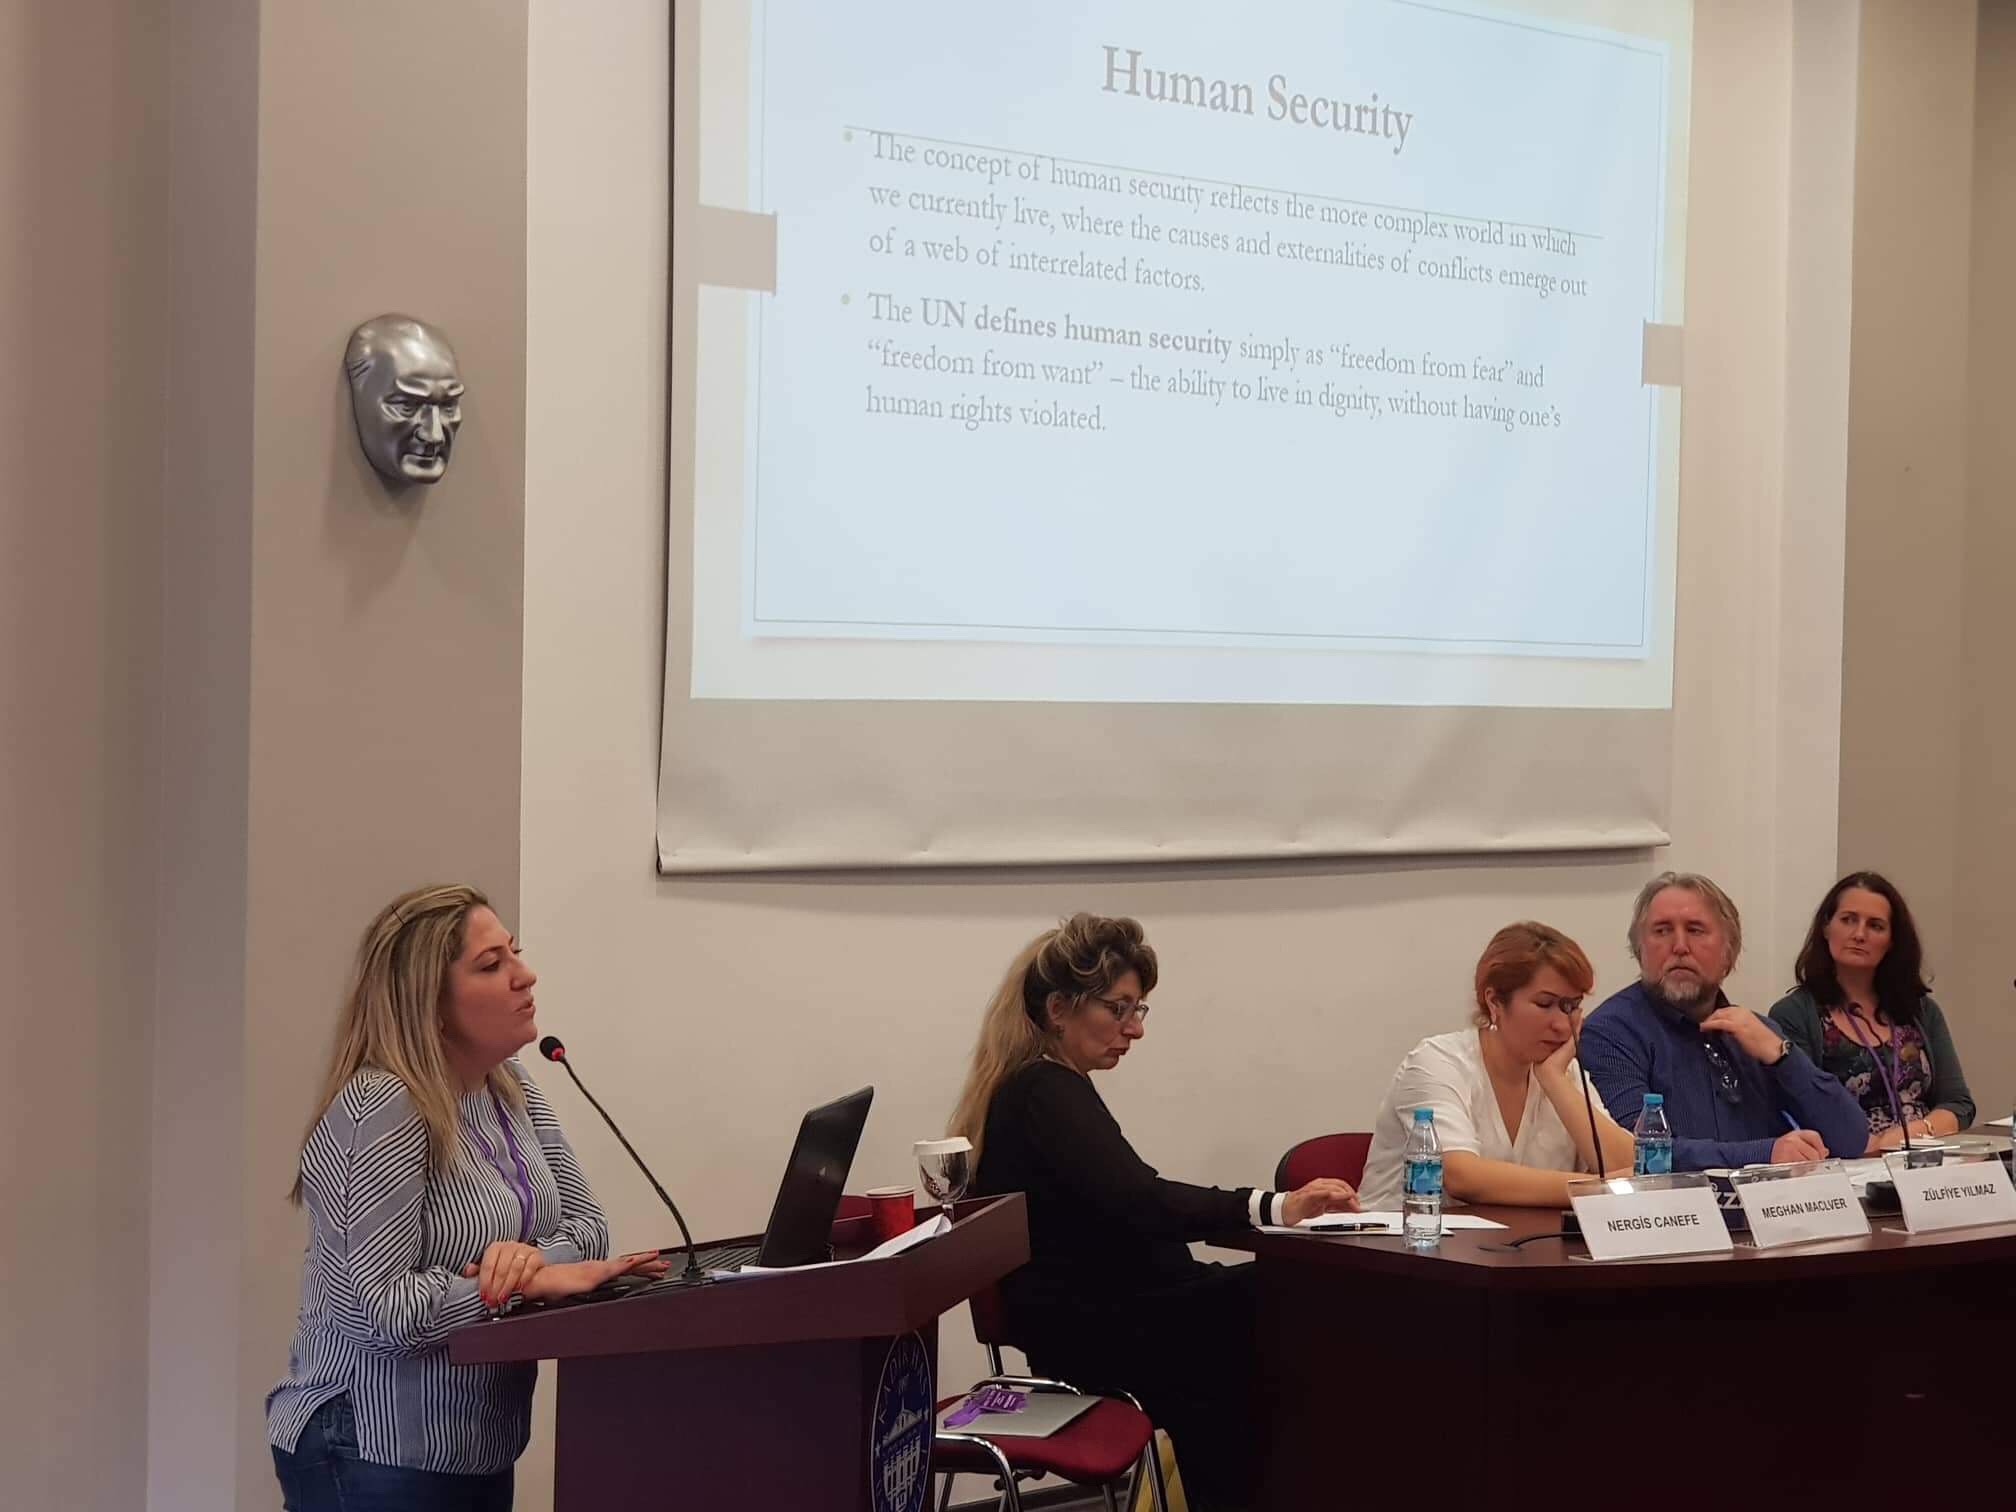 Near East University was represented at the Human Security Conference